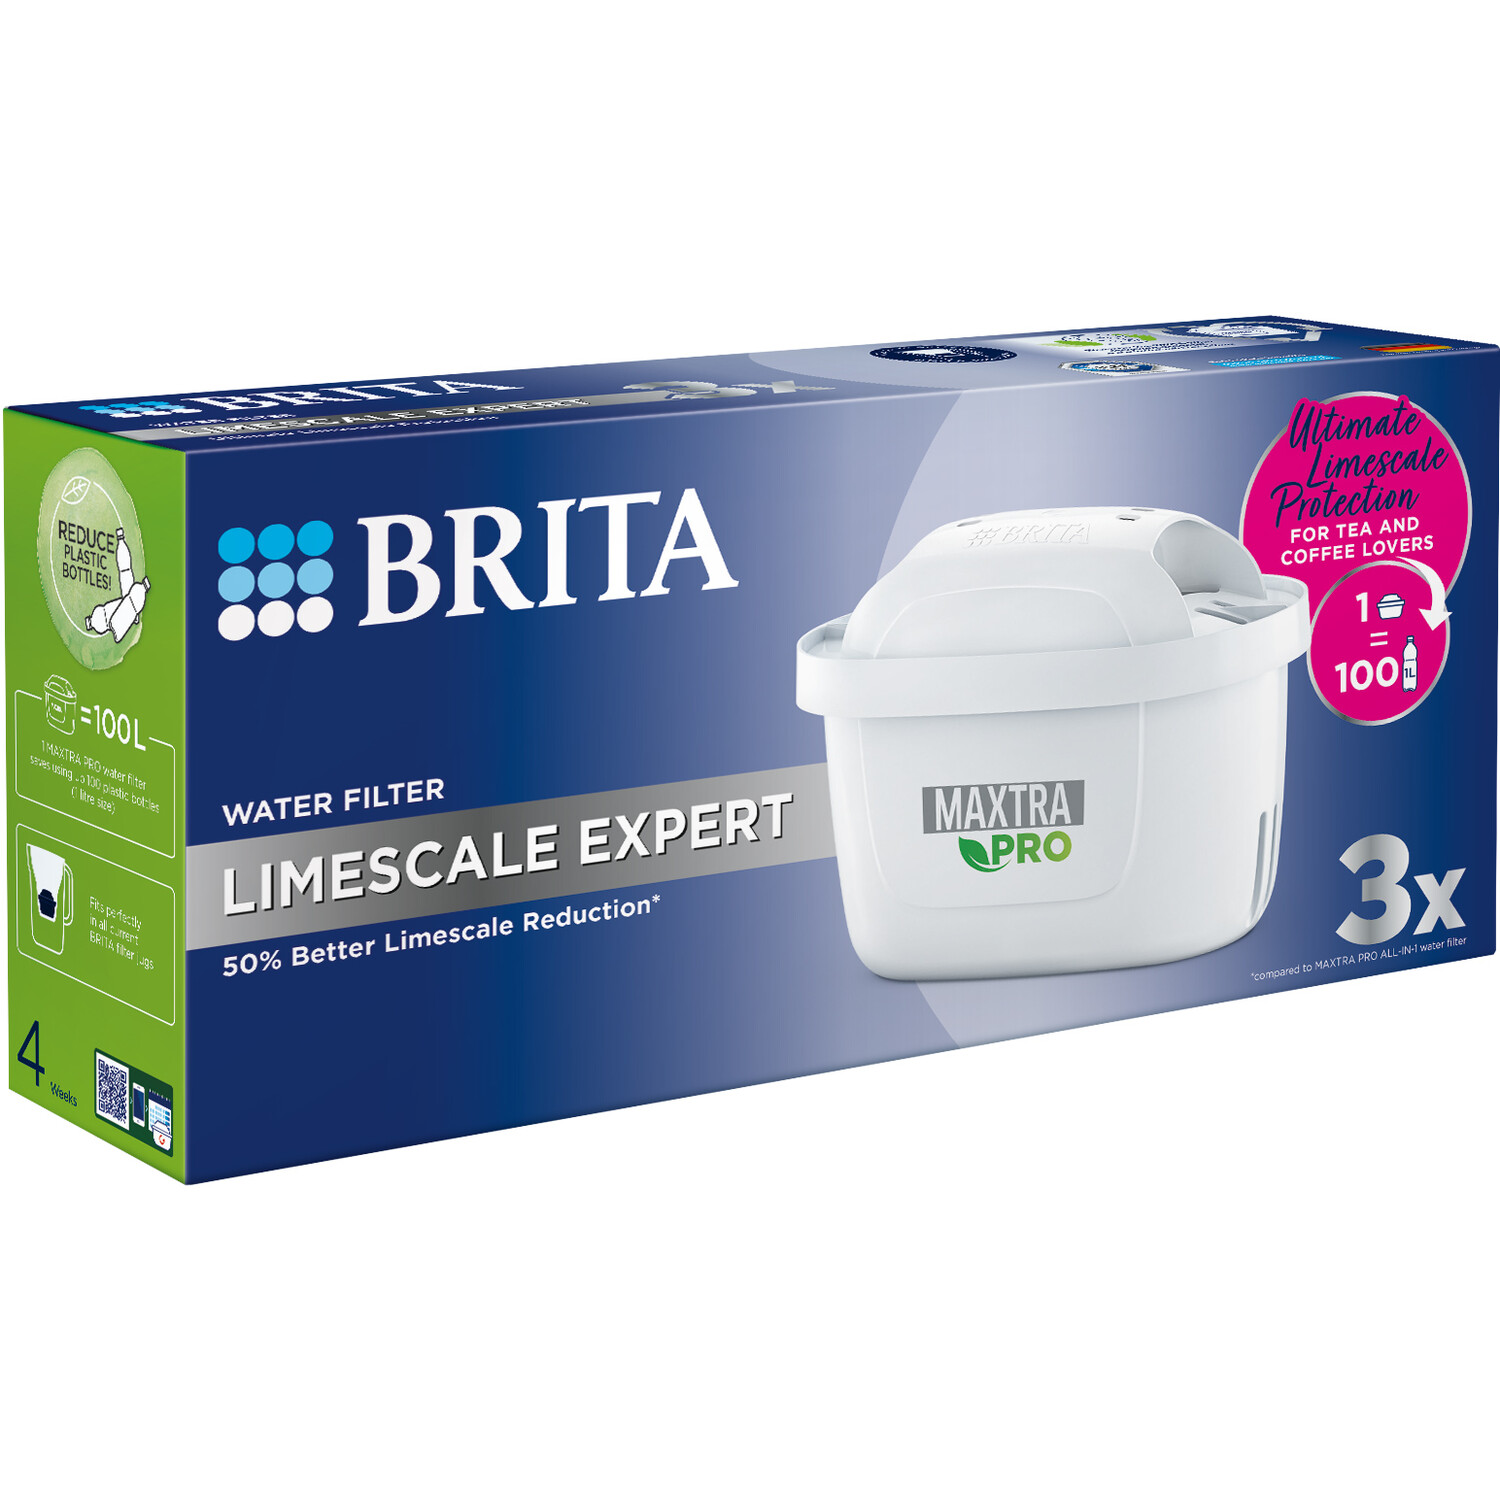 Brita Maxtra Pro White Limescale Expert Water Filter Cartridges 3 Pack Image 1